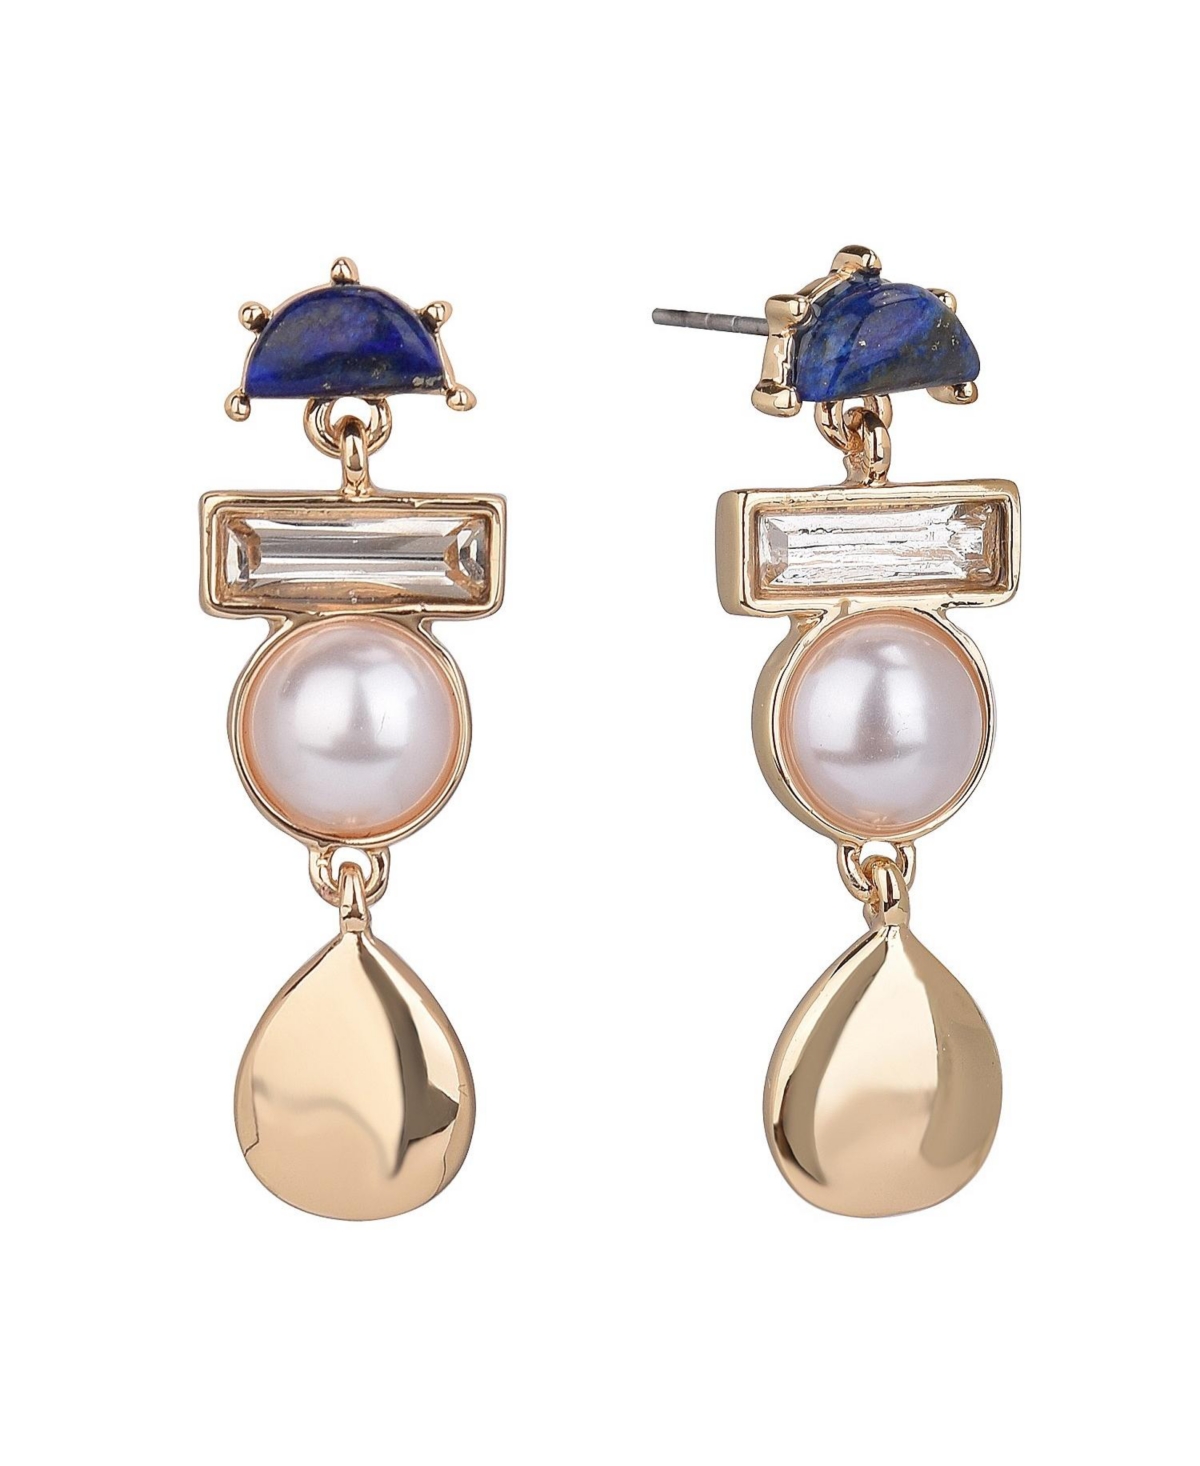 Gold Tone Linear Earrings with Stones and Pearls - Blue